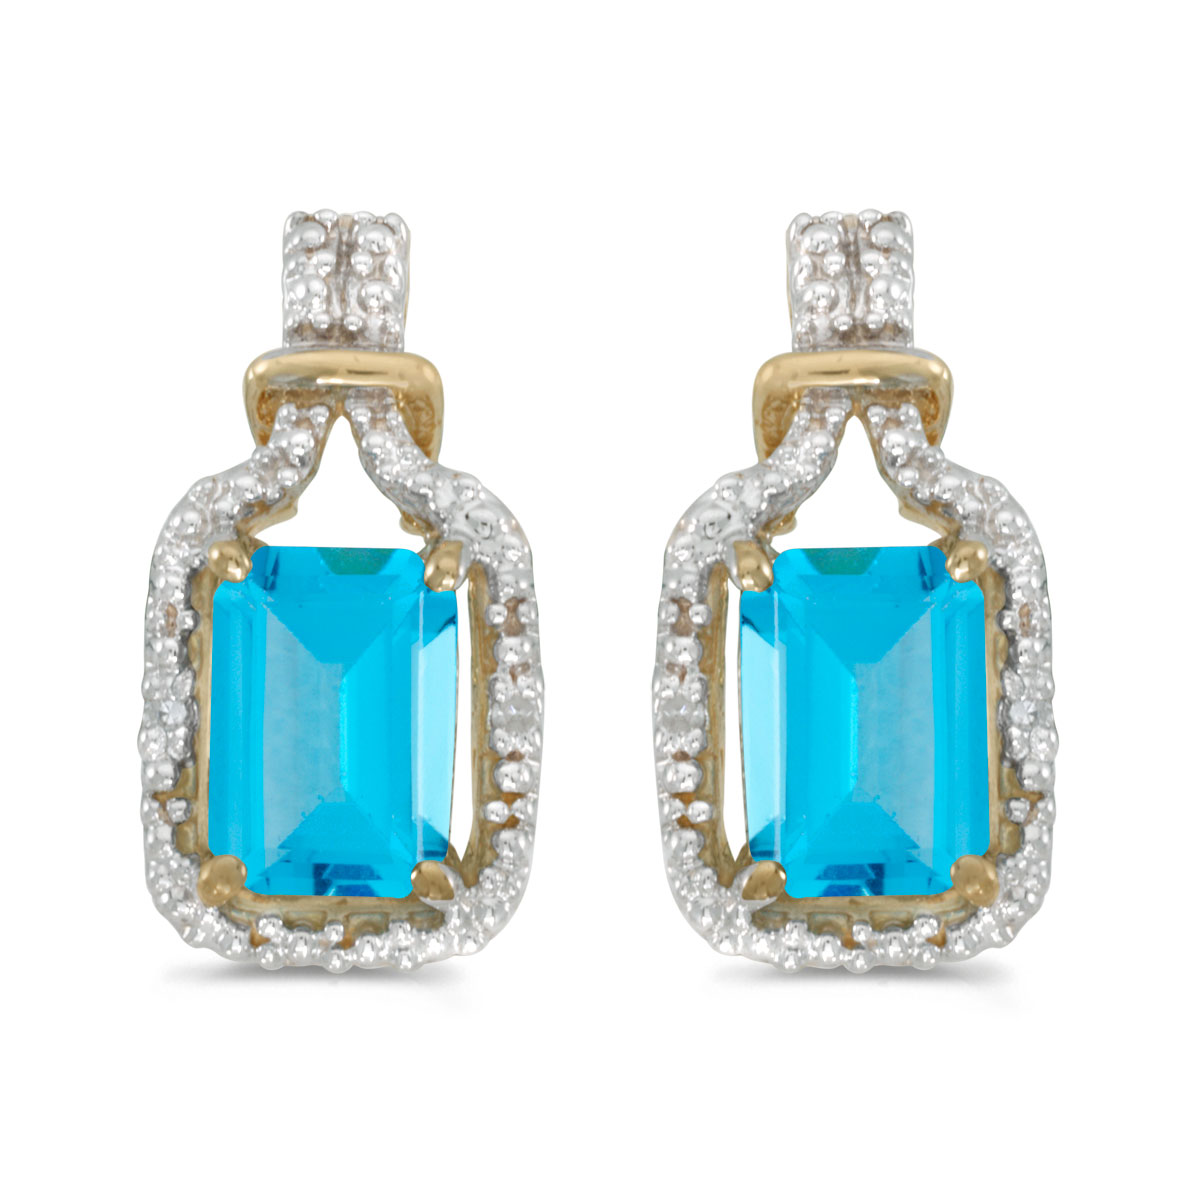 JCX2042: These 14k yellow gold emerald-cut blue topaz and diamond earrings feature 7x5 mm genuine natural blue topazs with a 2.30 ct total weight and sparkling diamond accents.